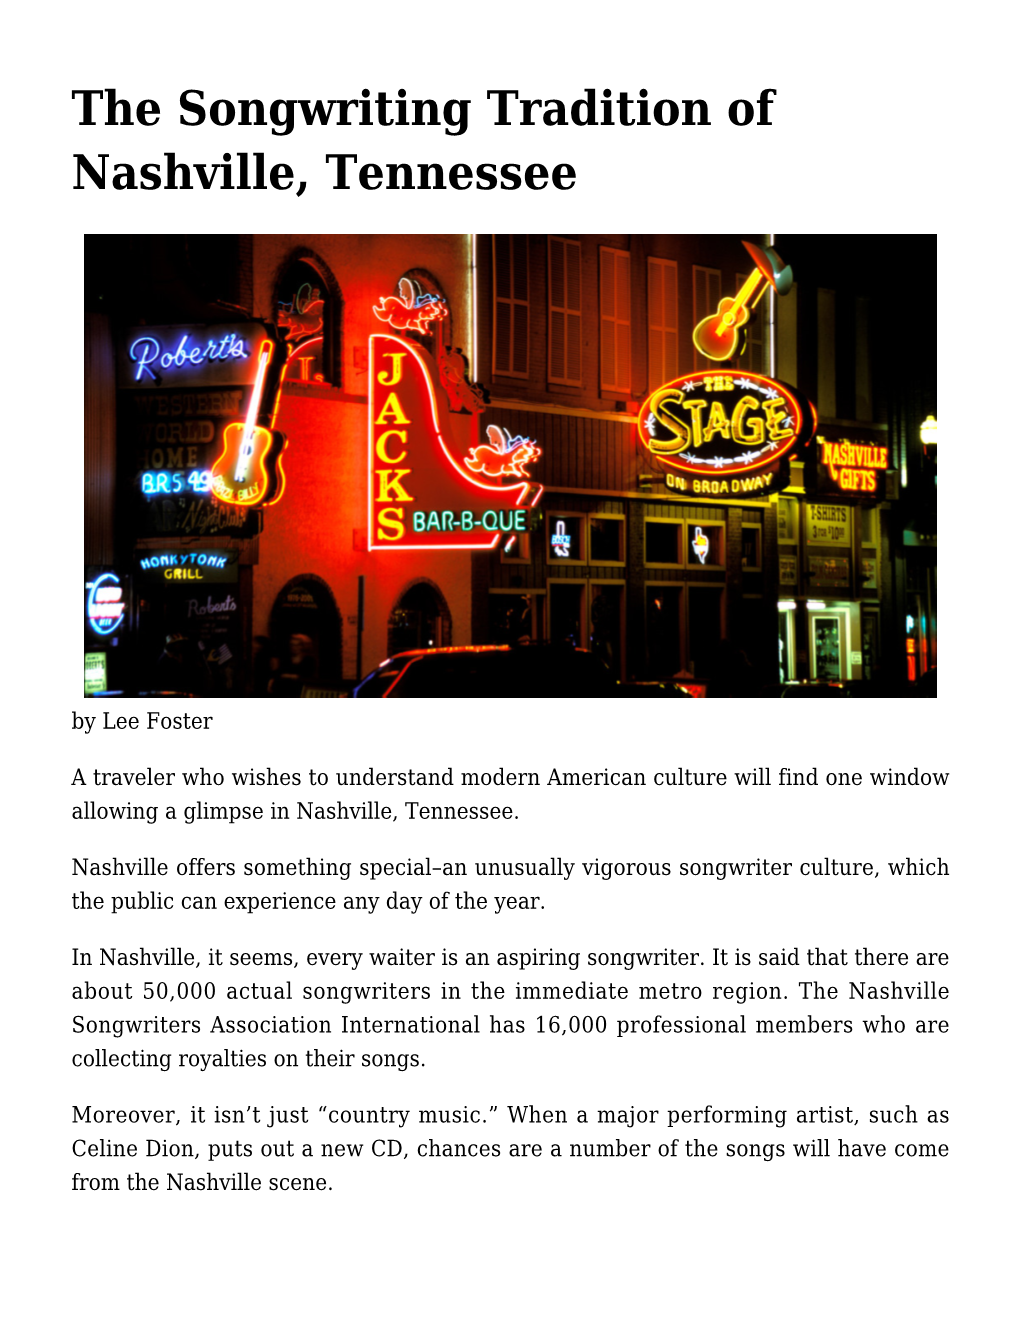 The Songwriting Tradition of Nashville, Tennessee